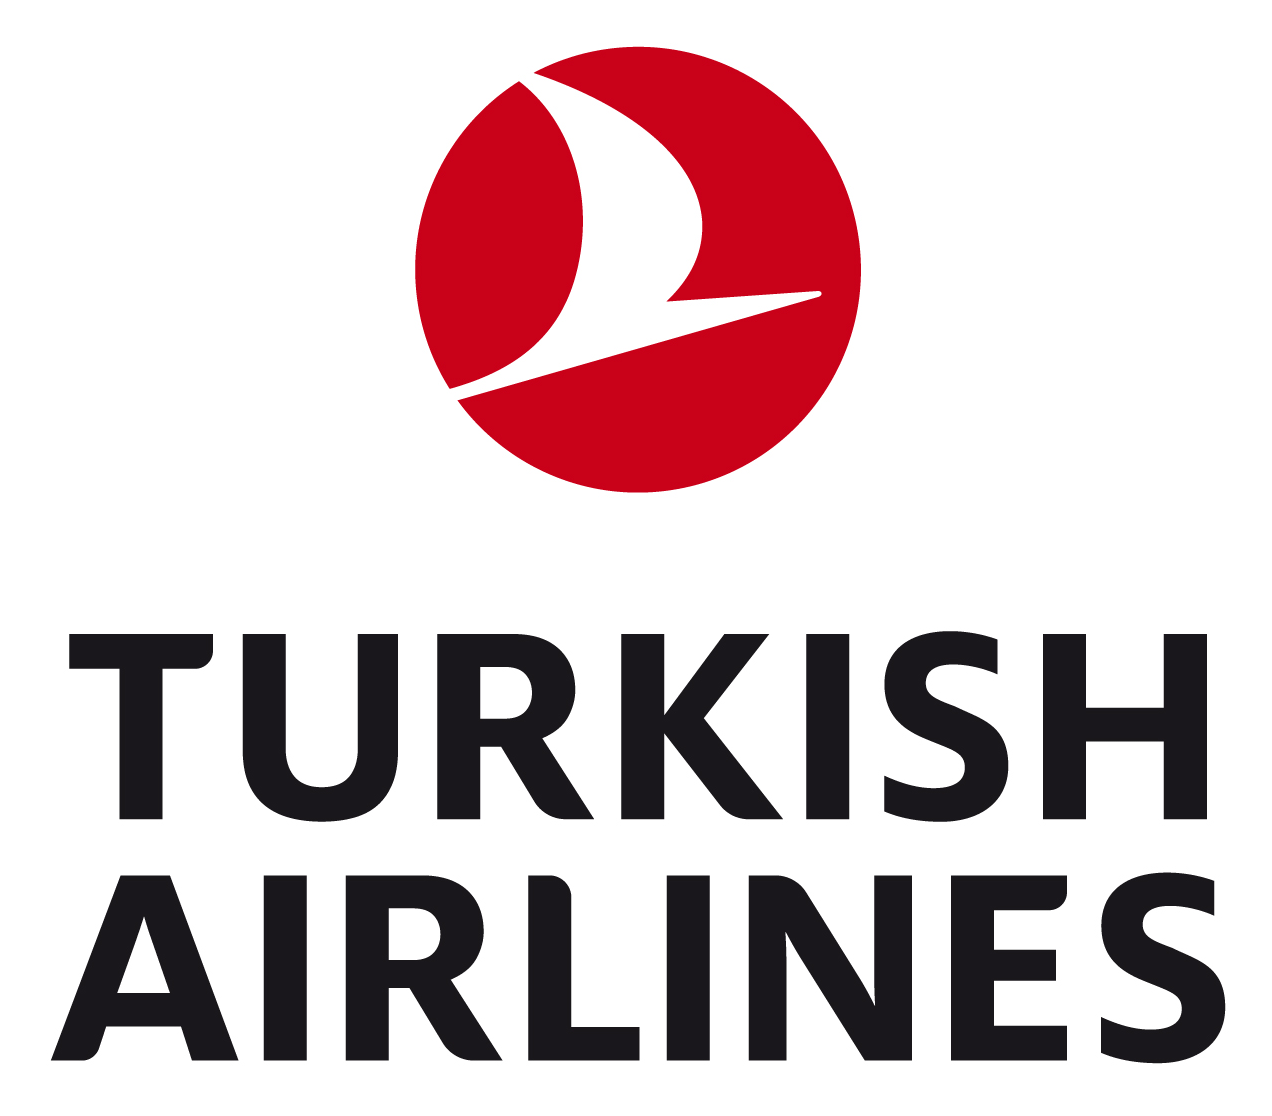 Comment contacter Turkish Airlines service client ?